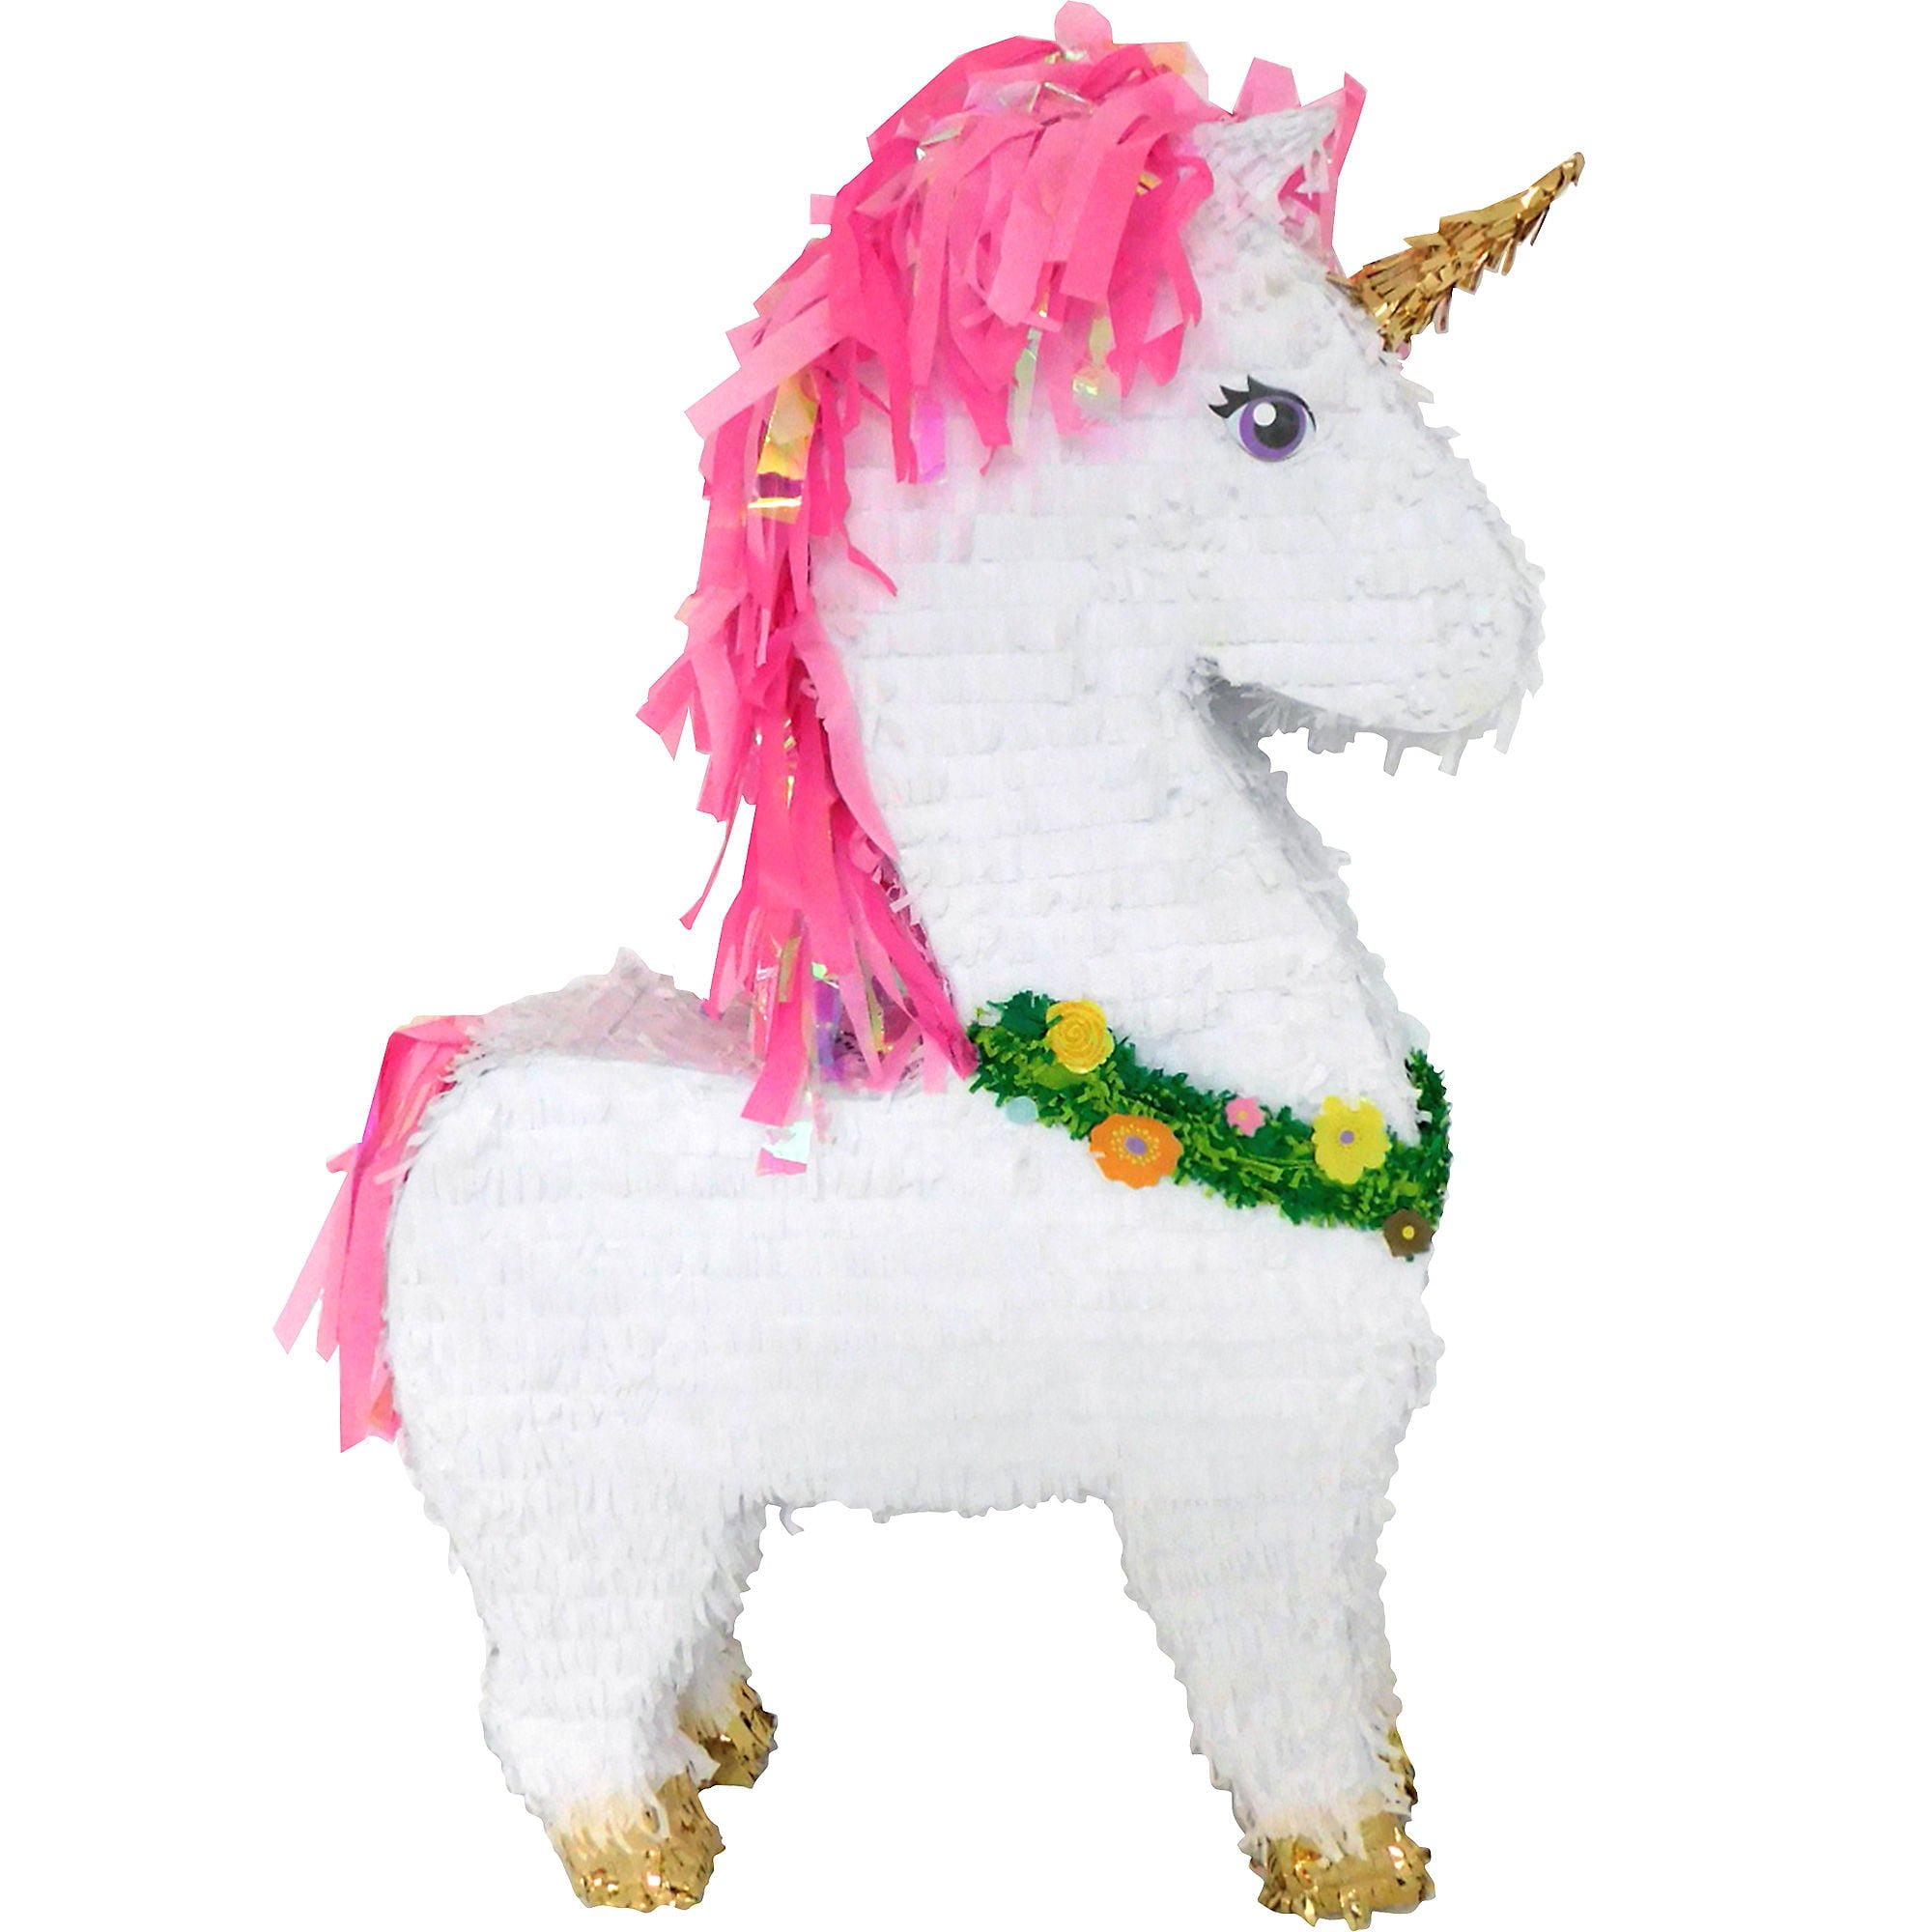 Lytio Unicorn Pinatas for Birthday Party Full White with Multi Color Hair and Pink Heart Details 